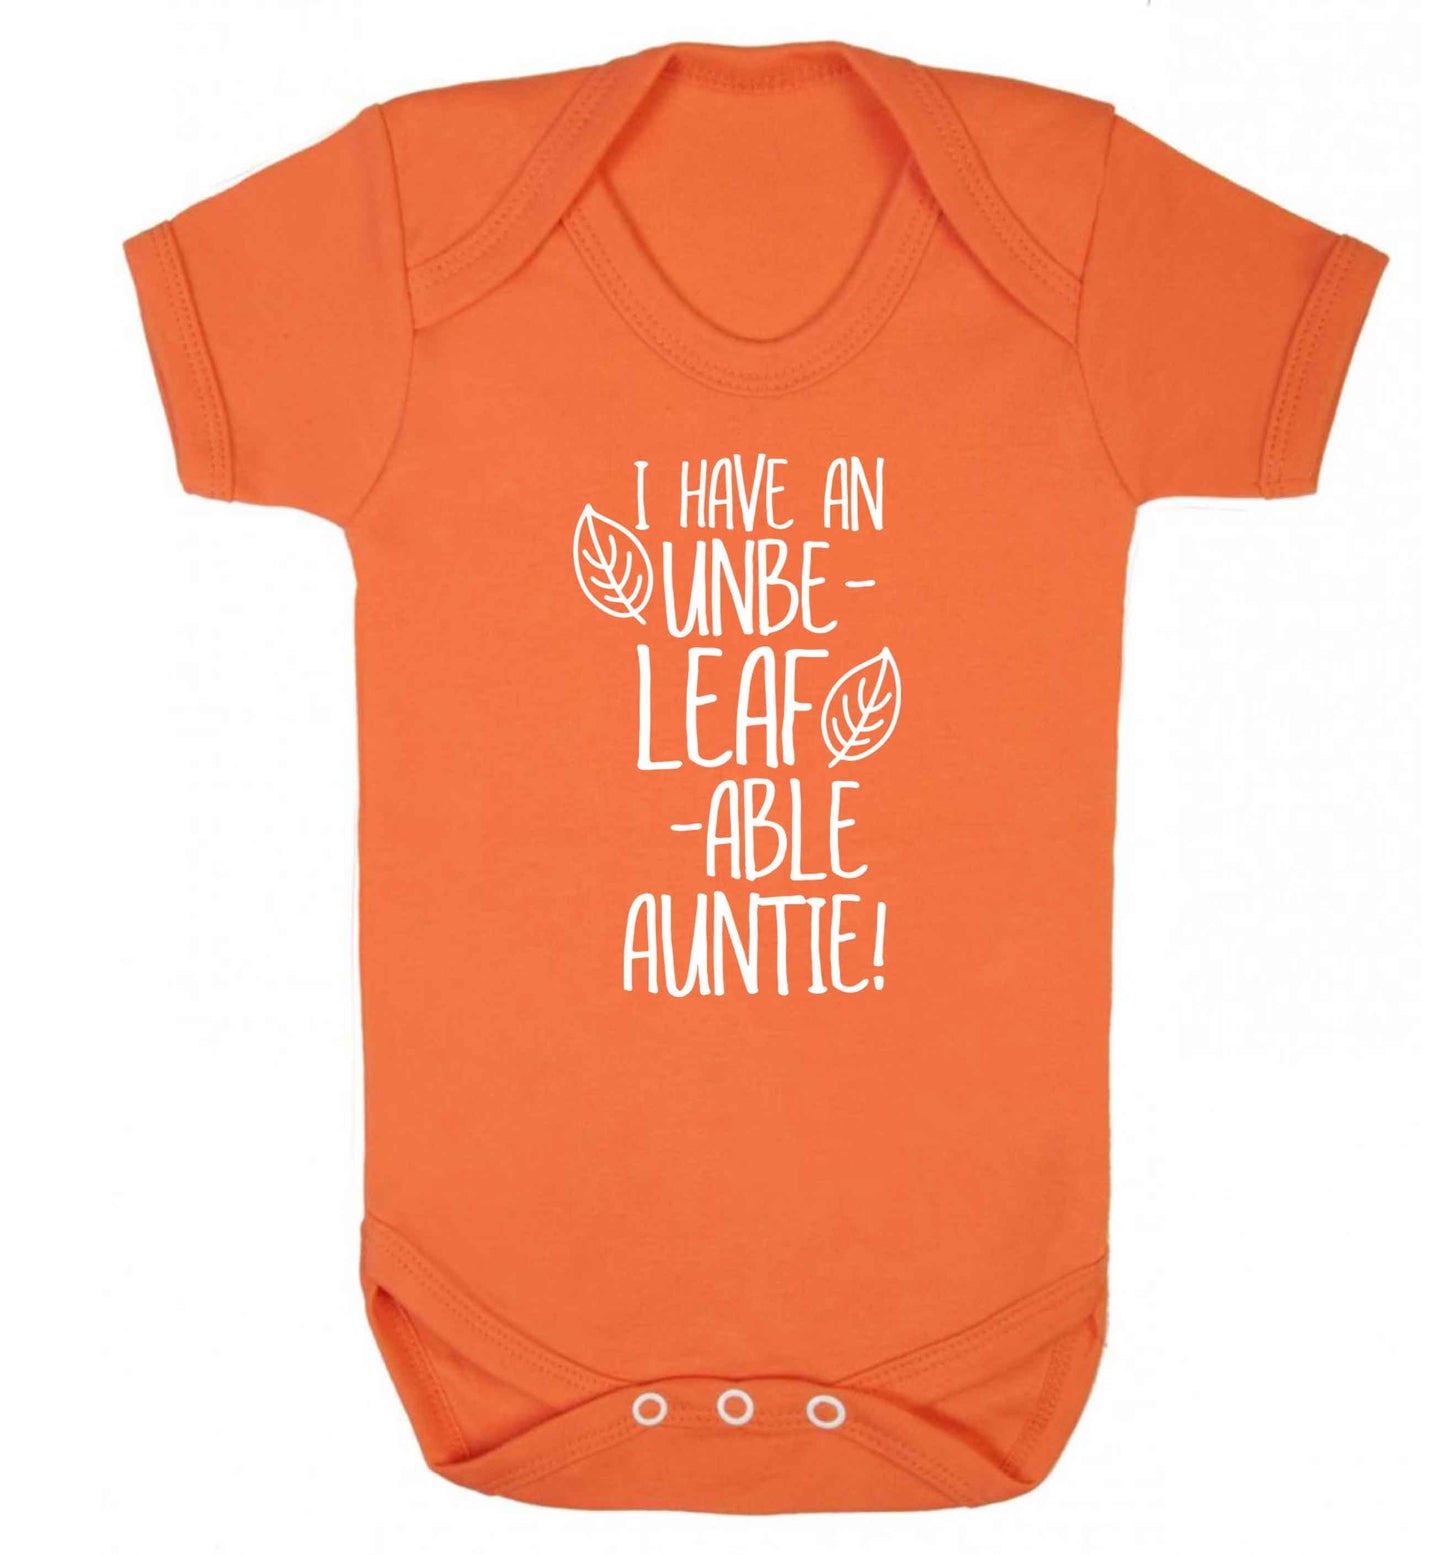 I have an unbe-leaf-able auntie Baby Vest orange 18-24 months